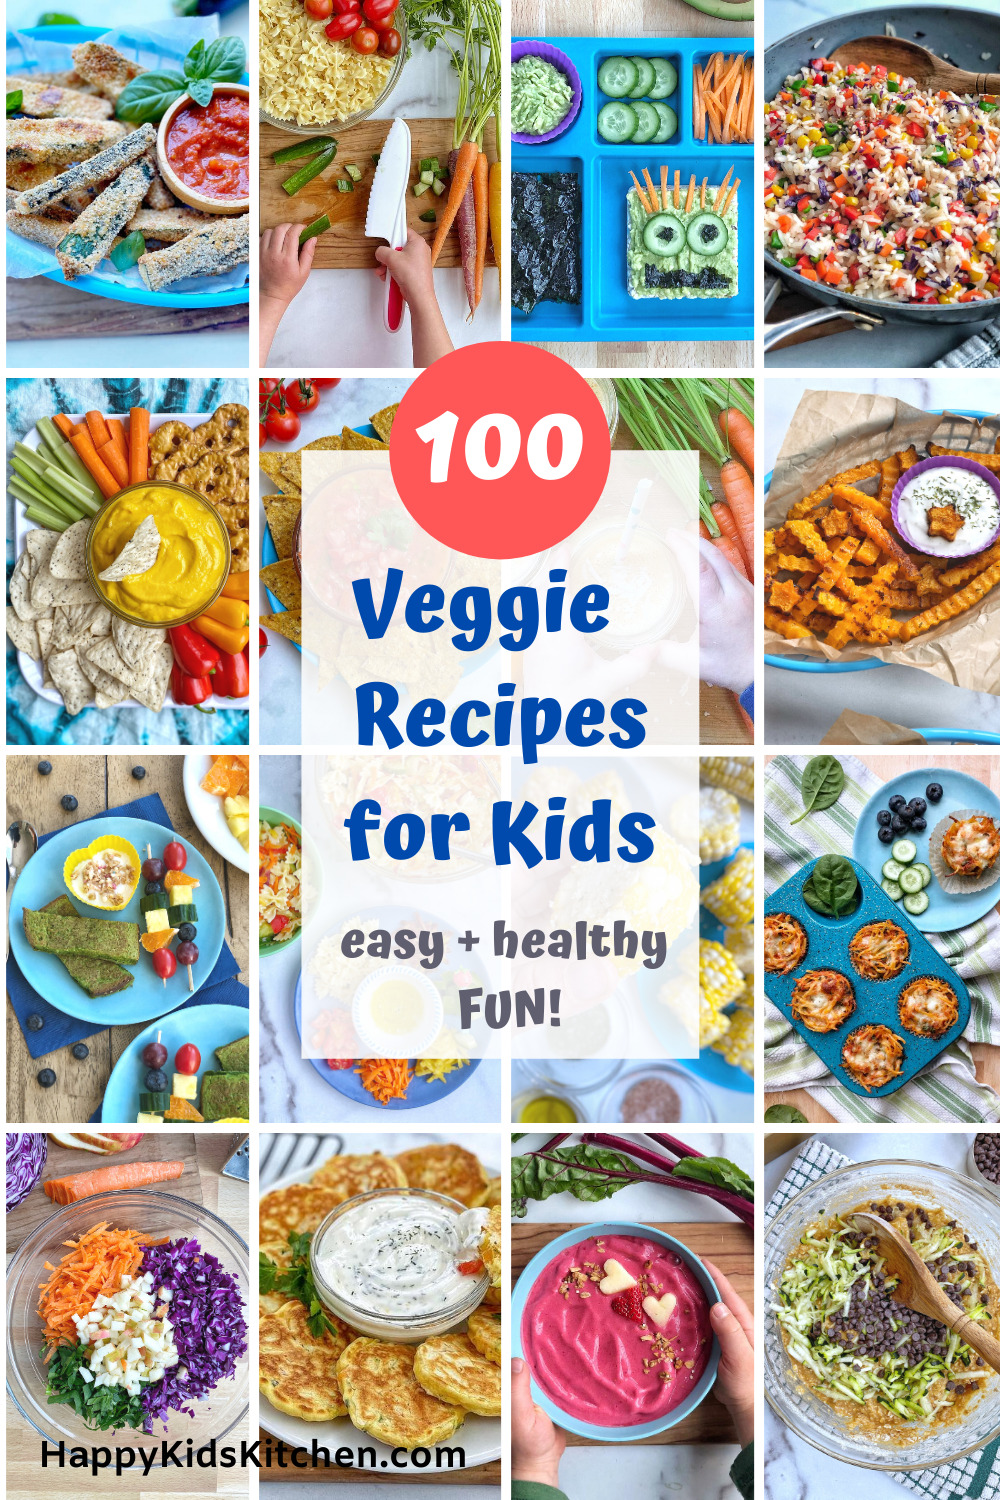 https://happykidskitchen.com/wp-content/uploads/2020/08/15-Childrens-Books-about-Diverse-Cultures-and-Food-2.jpg